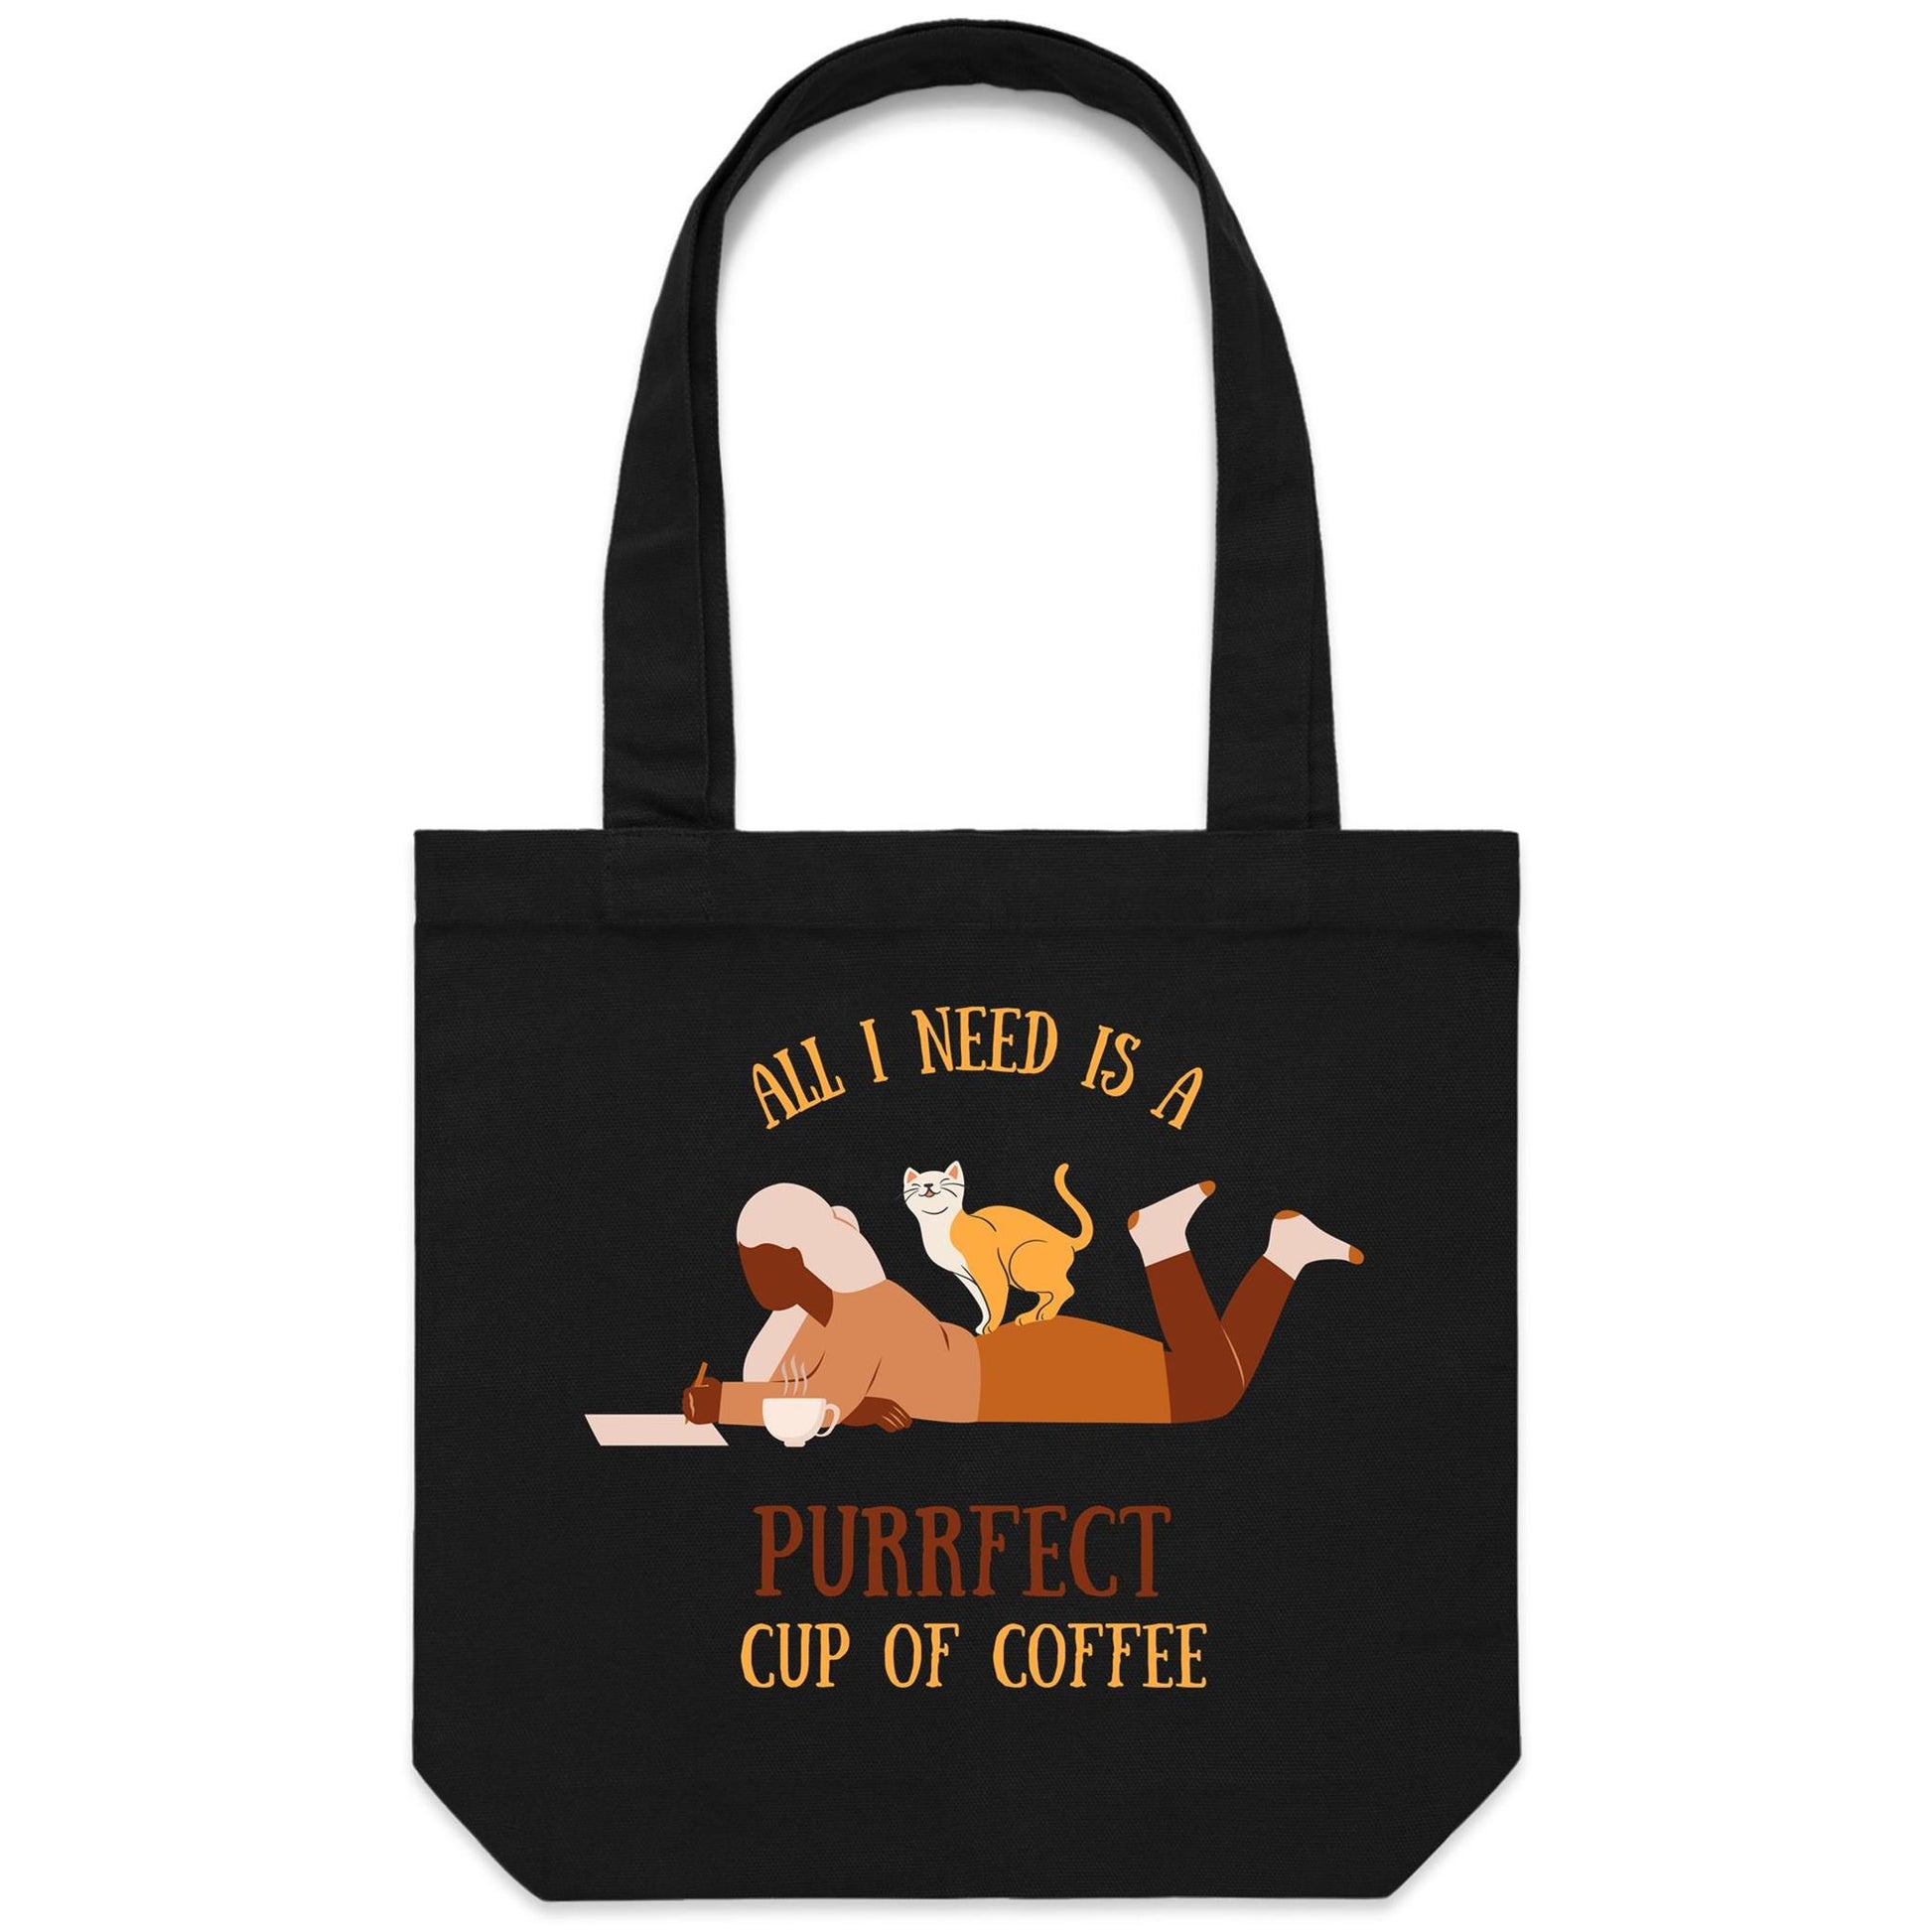 All I Need Is A Purrfect Cup Of Coffee - Canvas Tote Bag Black One Size Tote Bag animal Coffee